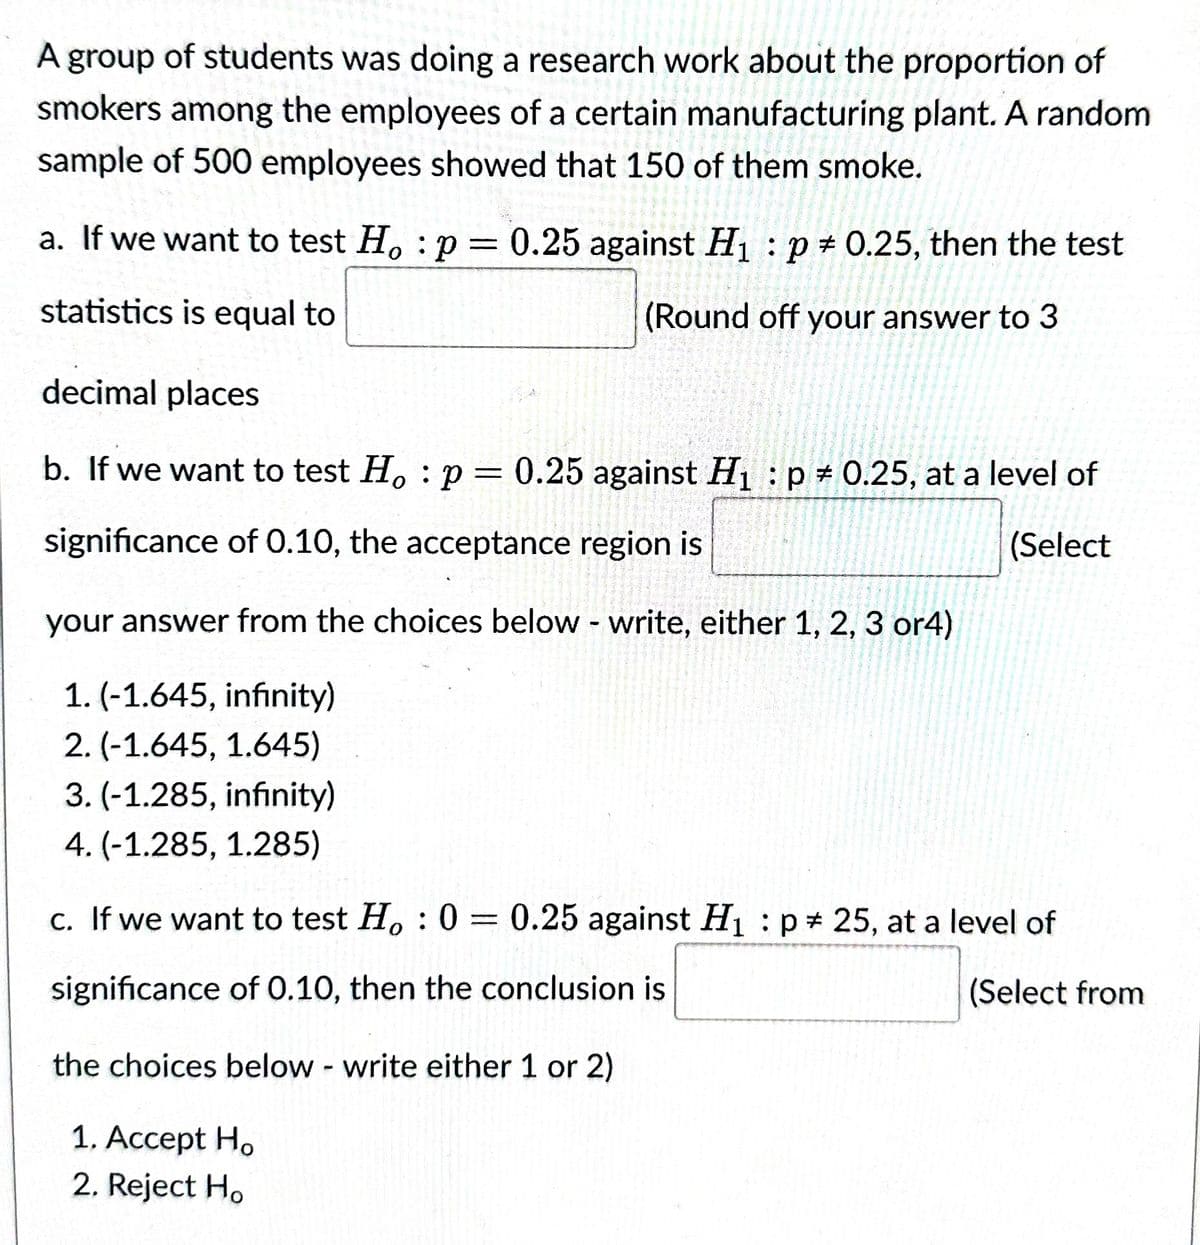 A group of students was doing a research work about the proportion of
smokers among the employees of a certain manufacturing plant. A random
sample of 500 employees showed that 150 of them smoke.
a. If we want to test Ho: p
=
statistics is equal to
0.25 against H₁ p = 0.25, then the test
(Round off your answer to 3
decimal places
b. If we want to test Ho: p = 0.25 against H₁ p = 0.25, at a level of
significance of 0.10, the acceptance region is
(Select
your answer from the choices below - write, either 1, 2, 3 or4)
1. (-1.645, infinity)
2. (-1.645, 1.645)
3. (-1.285, infinity)
4. (-1.285, 1.285)
c. If we want to test Ho: 0= 0.25 against H₁ p 25, at a level of
:
significance of 0.10, then the conclusion is
(Select from
the choices below - write either 1 or 2)
1. Accept Ho
2. Reject Ho